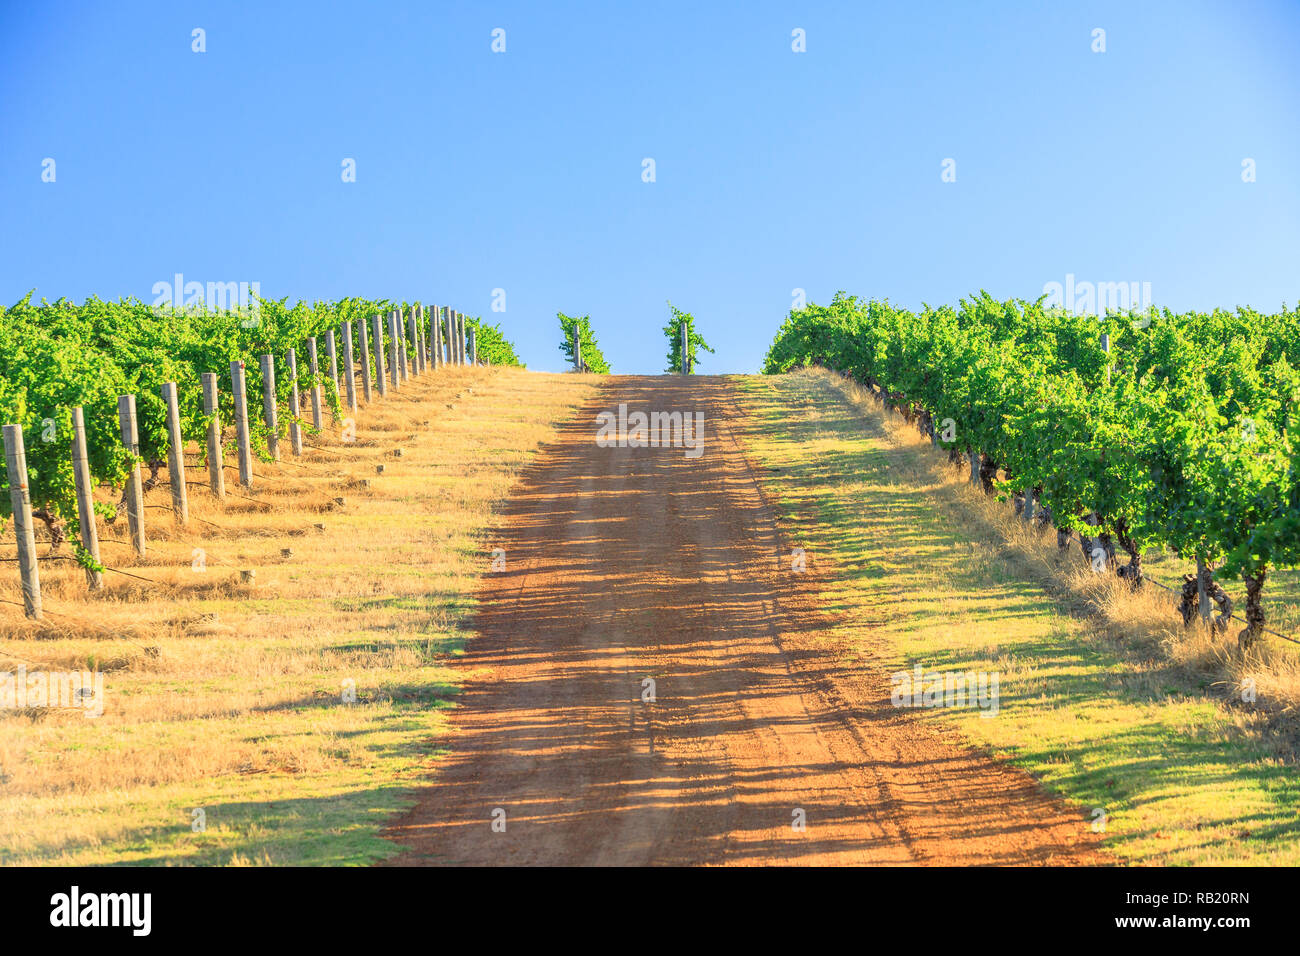 Seasonal background. Vineyard with rows of grapes in the scenic landscape of Wilyabrup in Margaret River the famous Wine Region in Western Australia where wine tasting tours are popular. Stock Photo